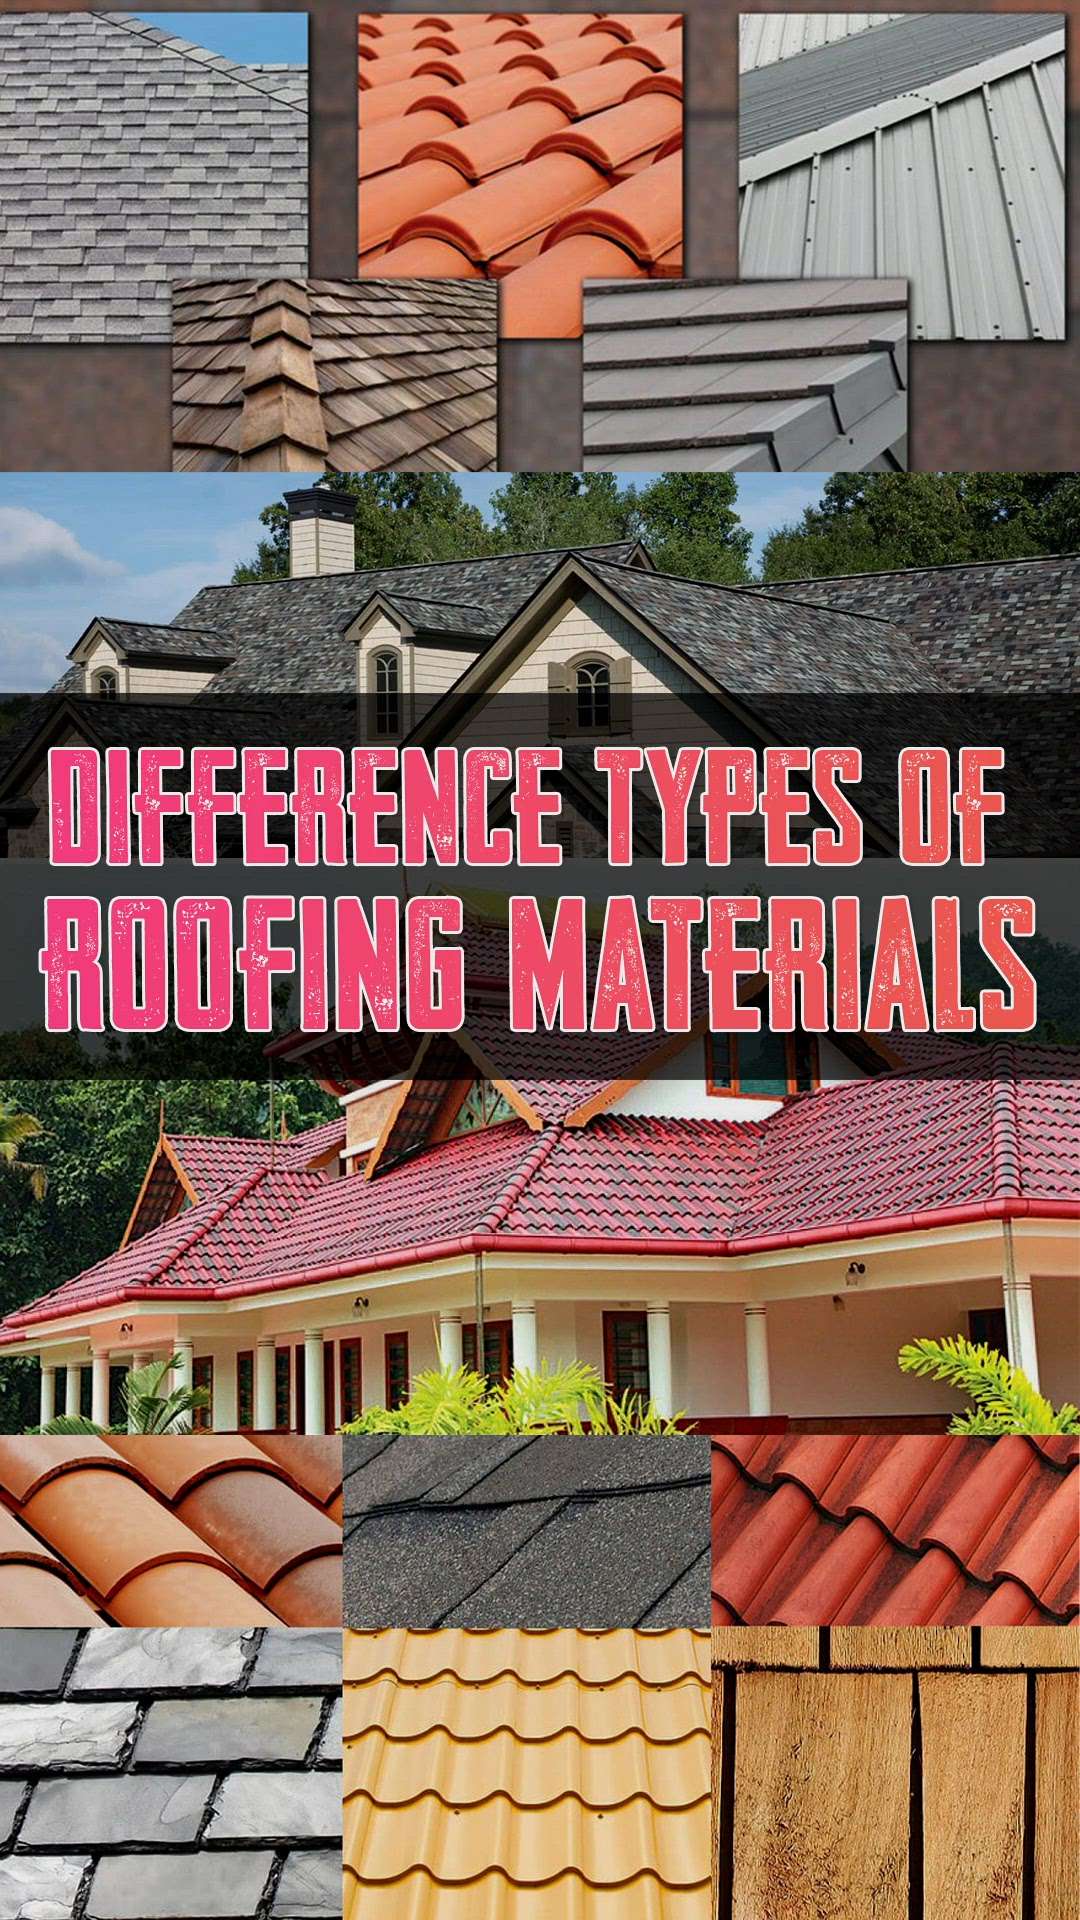 Explore the world of roofing materials! From durable metal to charming wood shakes and classic slate, we break down the options. Watch to discover what suits your home best! 🏠 #RoofingMaterials #HomeImprovement #PropertyMaintenance
#Roofing #HomeRenovation #DIY #Construction #HouseMaintenance #RoofingOptions #PropertyDesign #HomeUpgrades #ExteriorDesign #sustainableliving